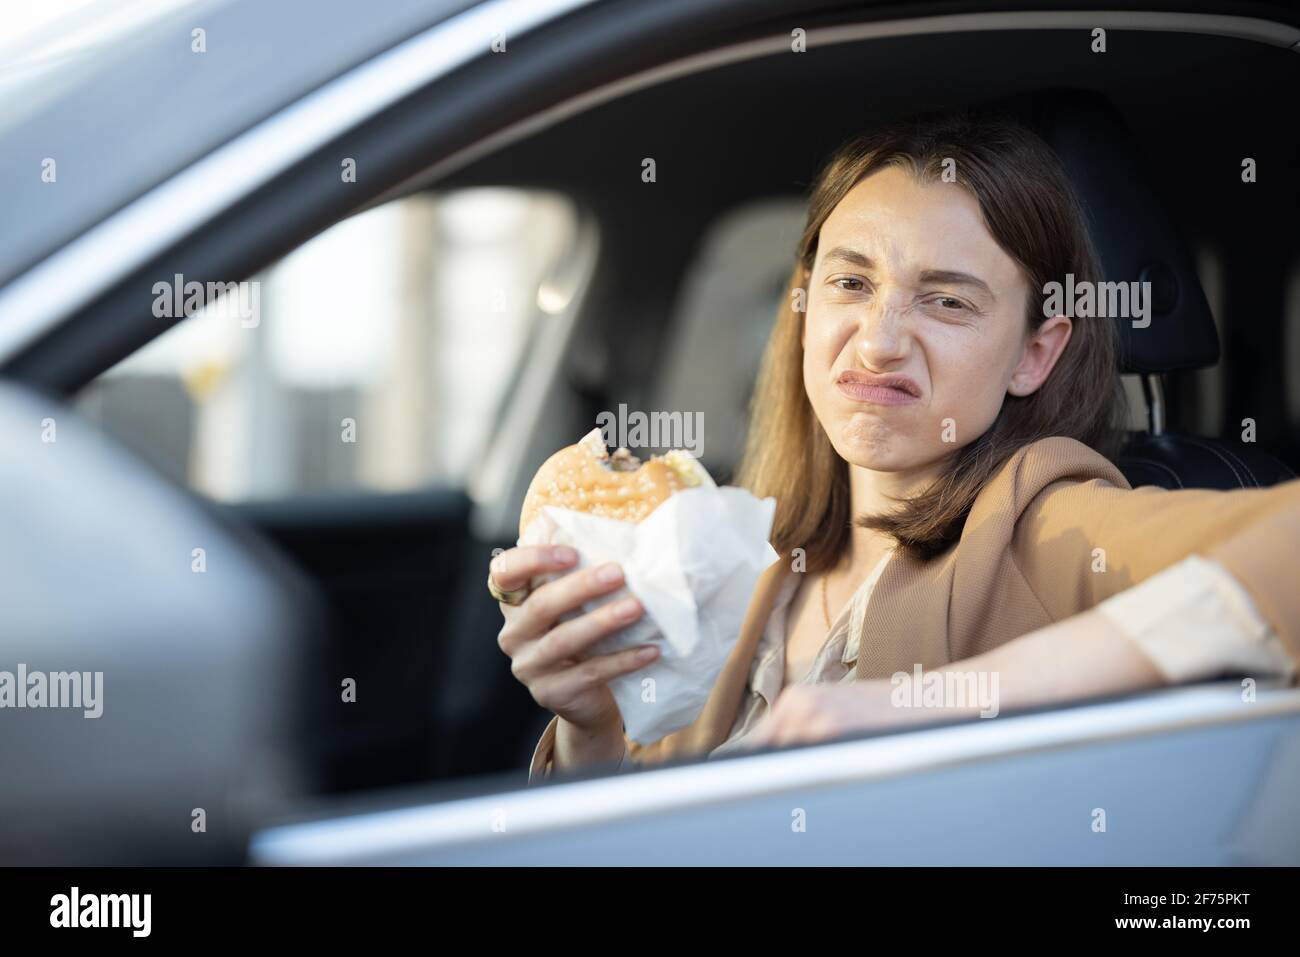 Grimaced woman eating a burger in the car. Have unhealthy tasteless fast food snack. Food to go. Hungry and busy concept. Stock Photo